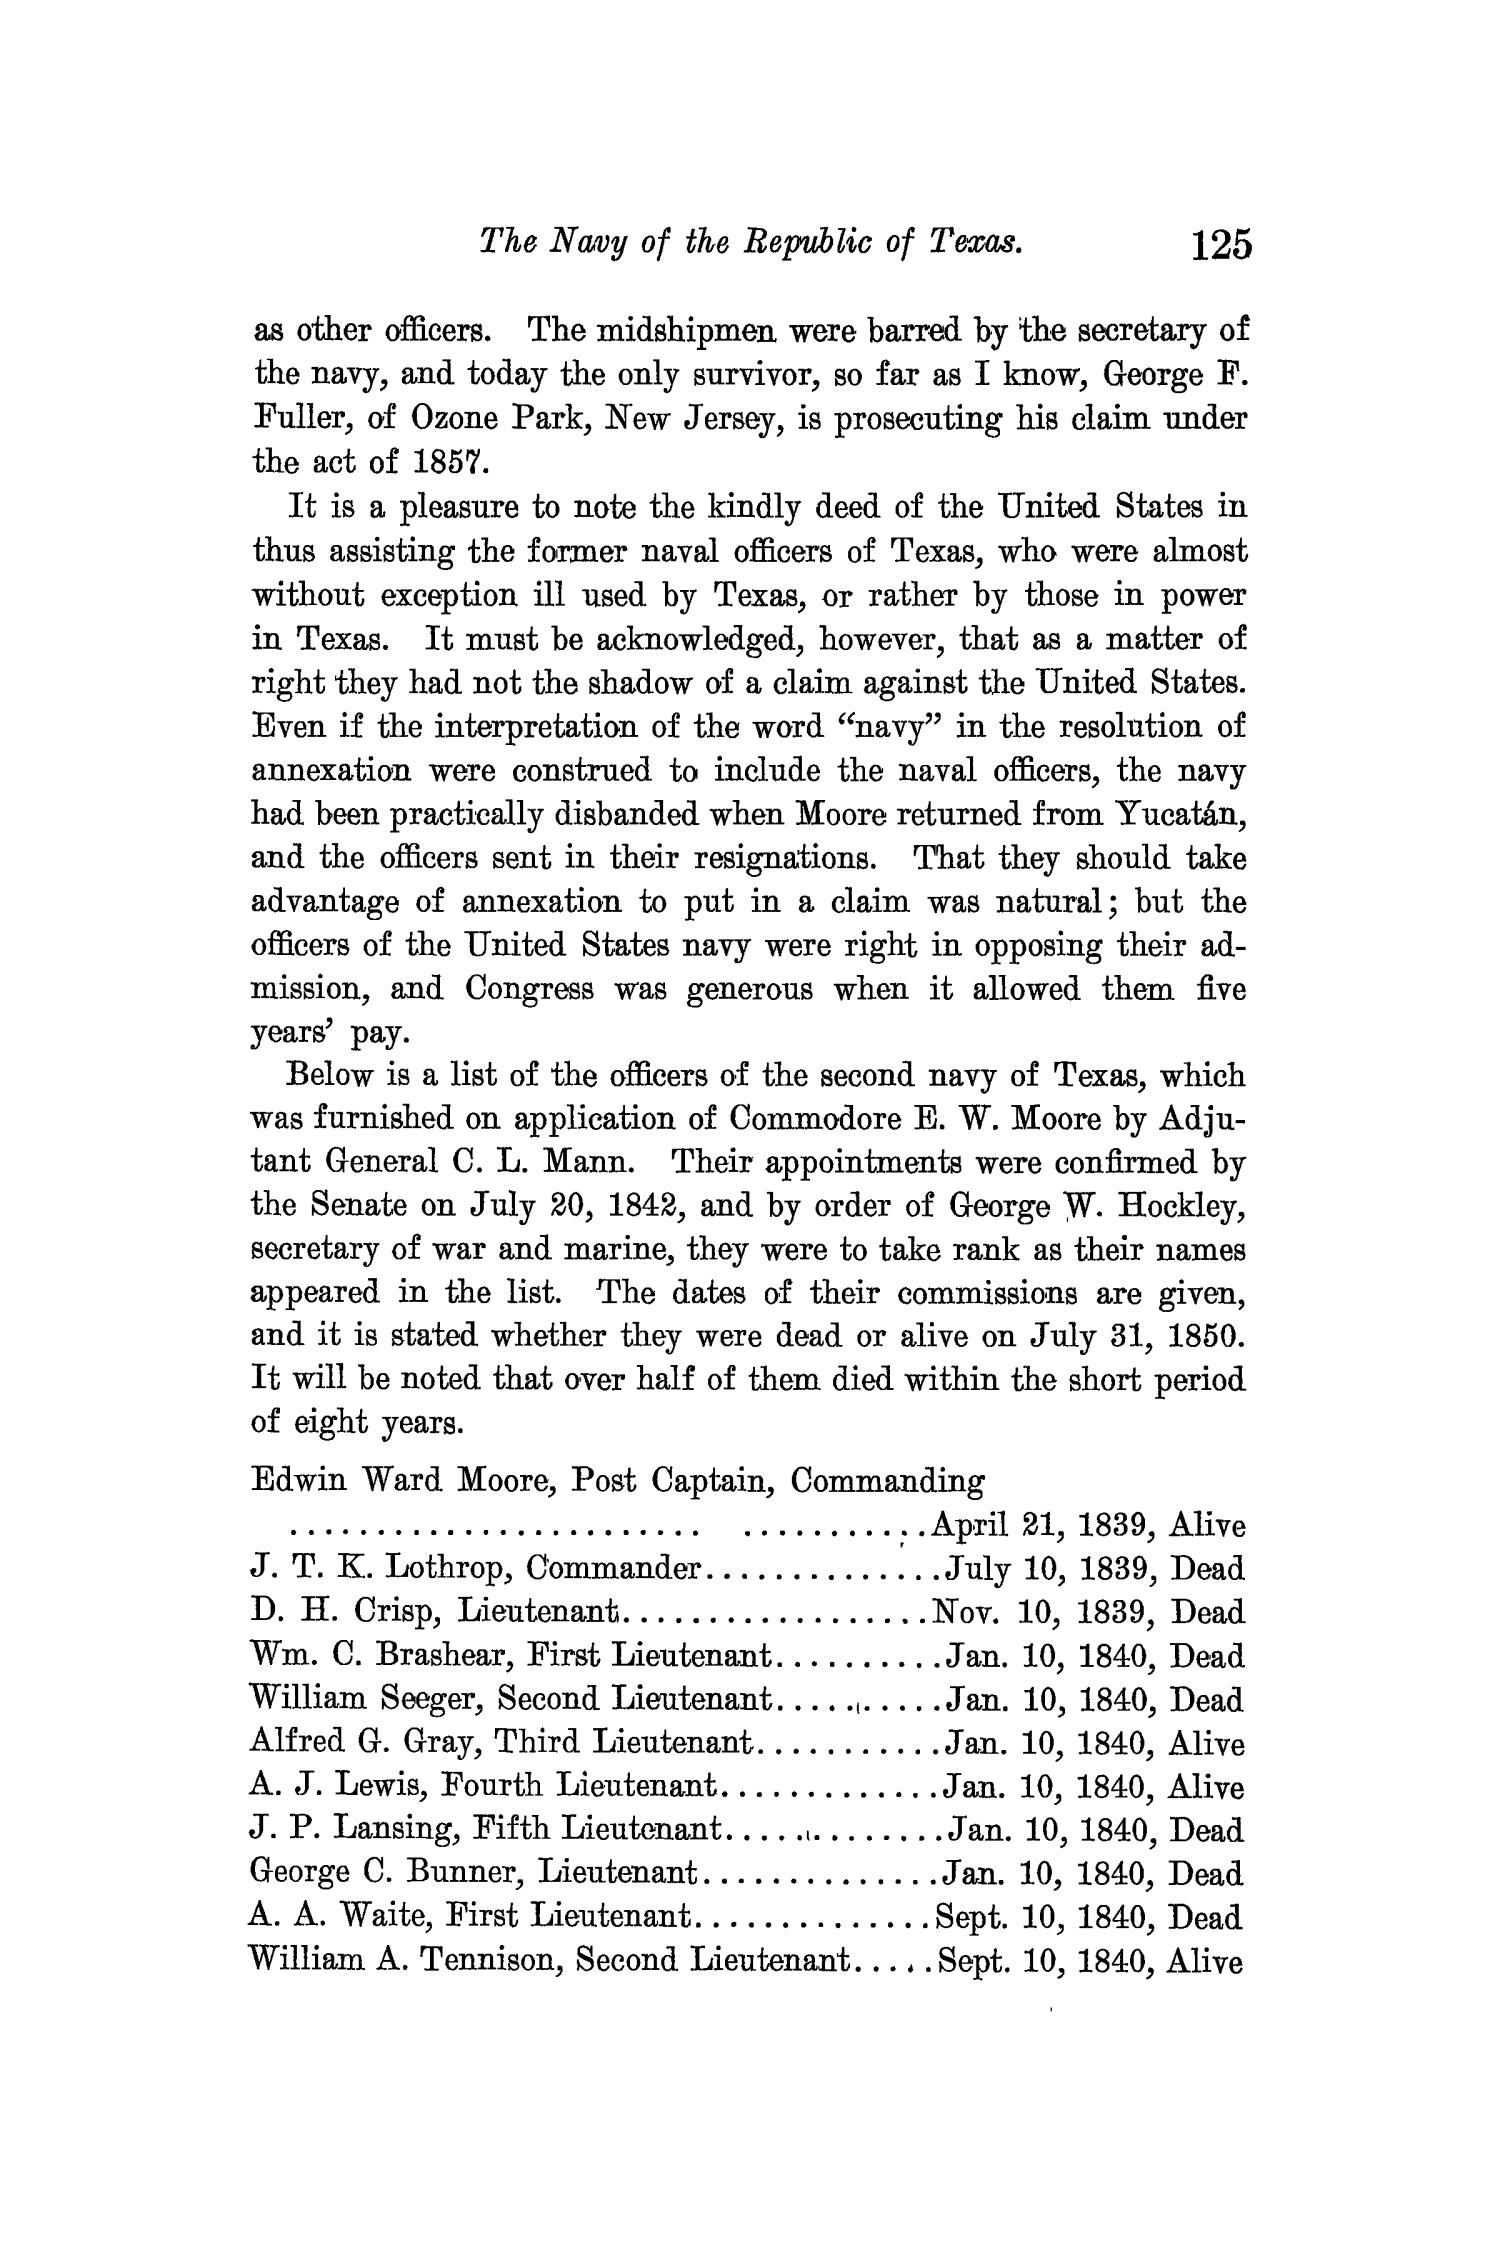 The Quarterly of the Texas State Historical Association, Volume 13, July 1909 - April, 1910
                                                
                                                    125
                                                